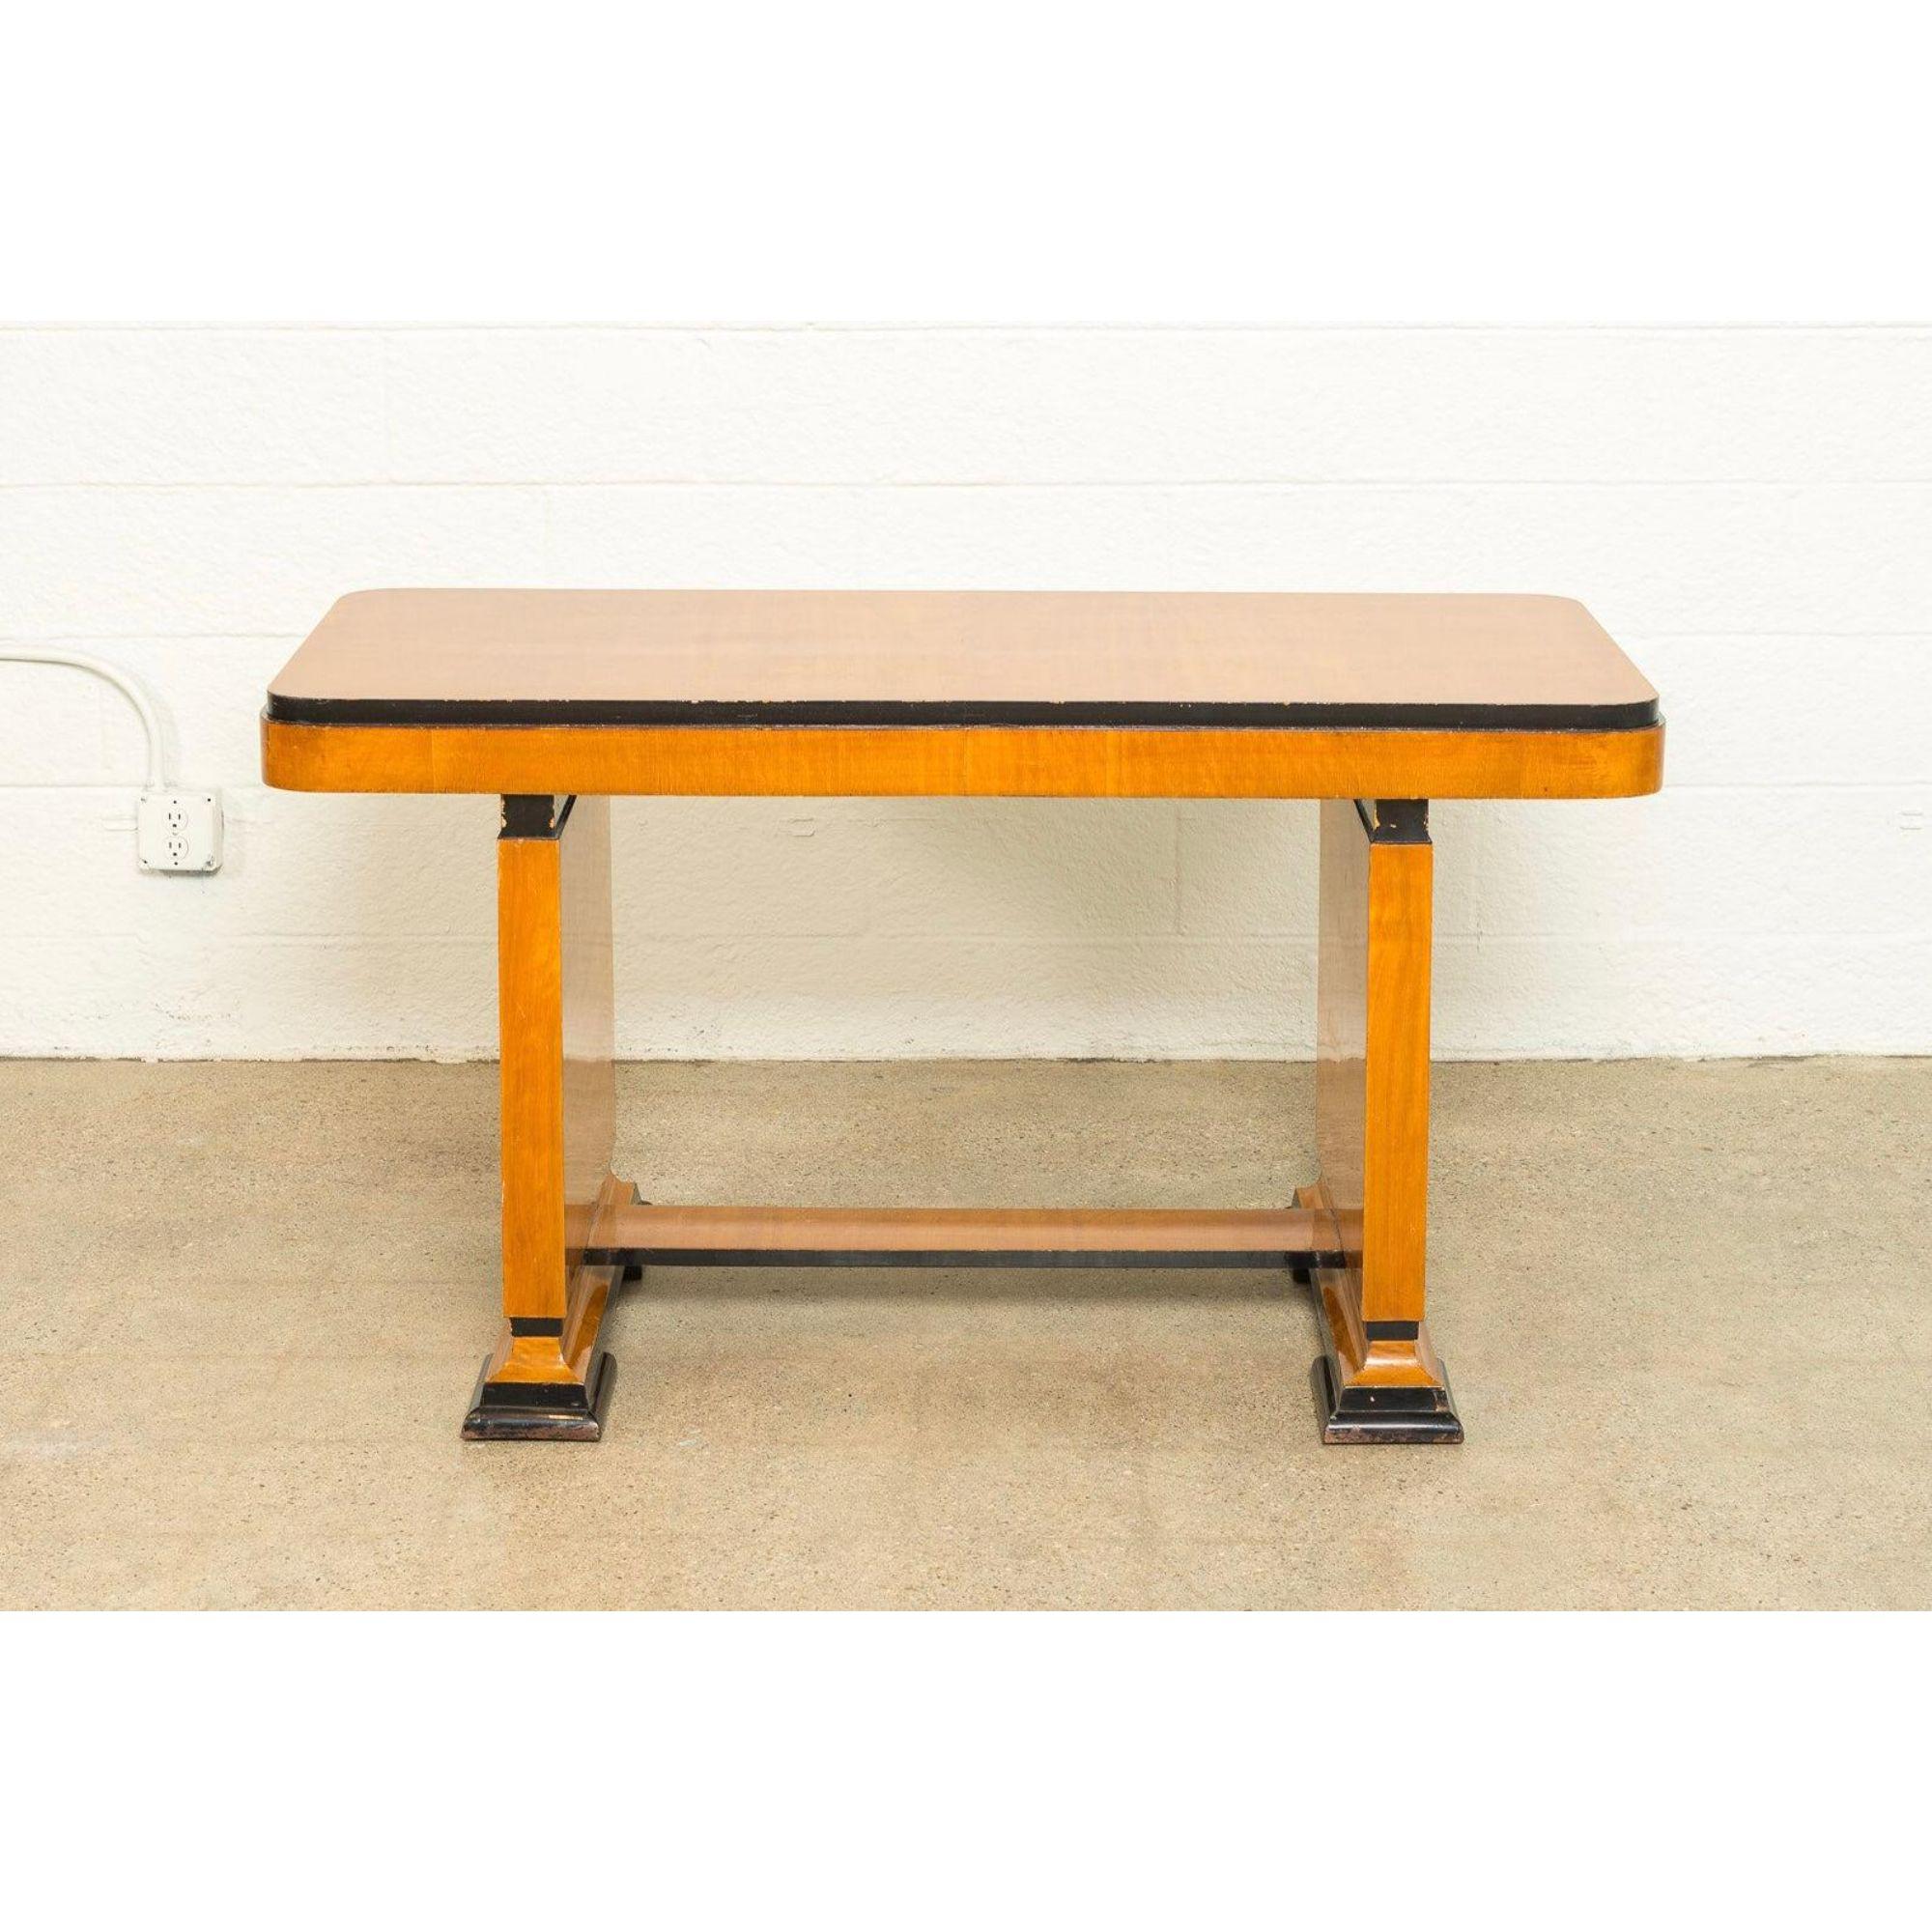 Art Deco Table or Writing Desk in Maple Wood with Ebonized Accents, circa 1930 In Good Condition For Sale In Detroit, MI